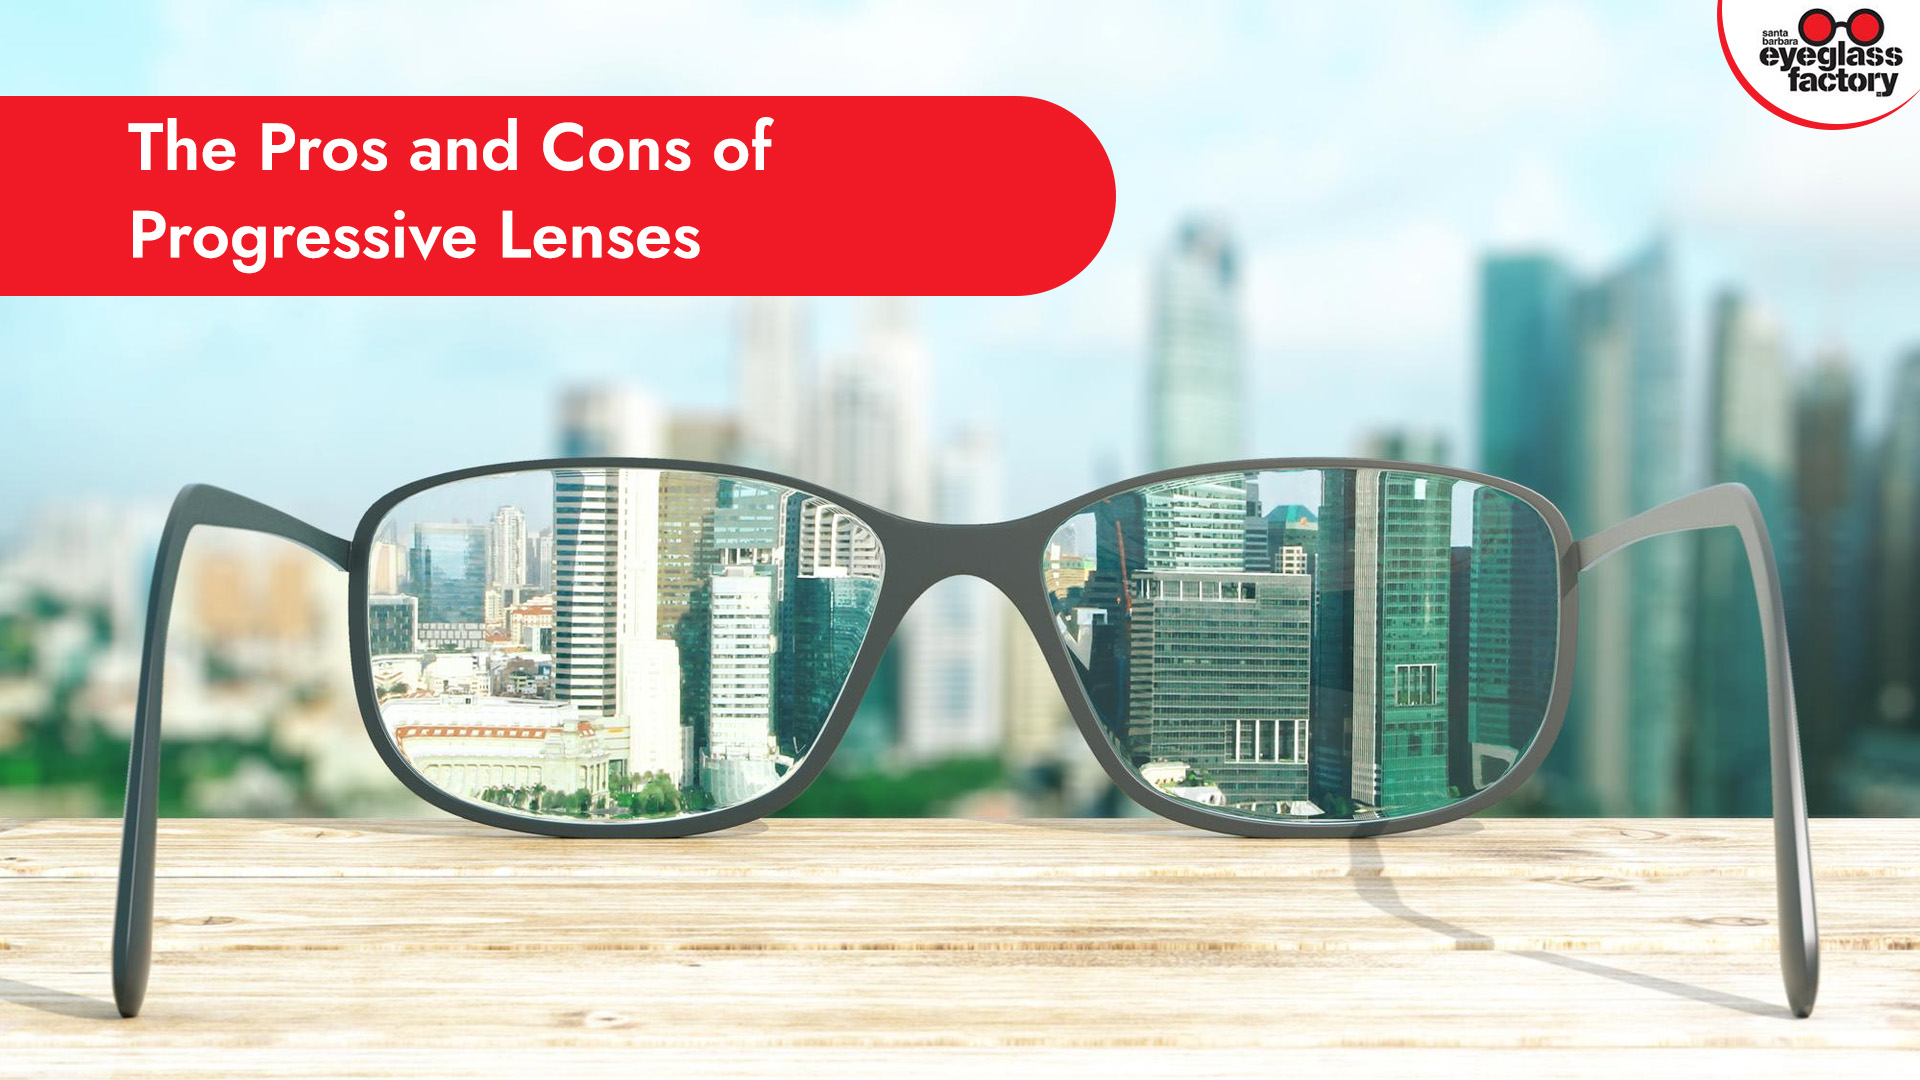 The Pros and Cons of Progressive Lenses